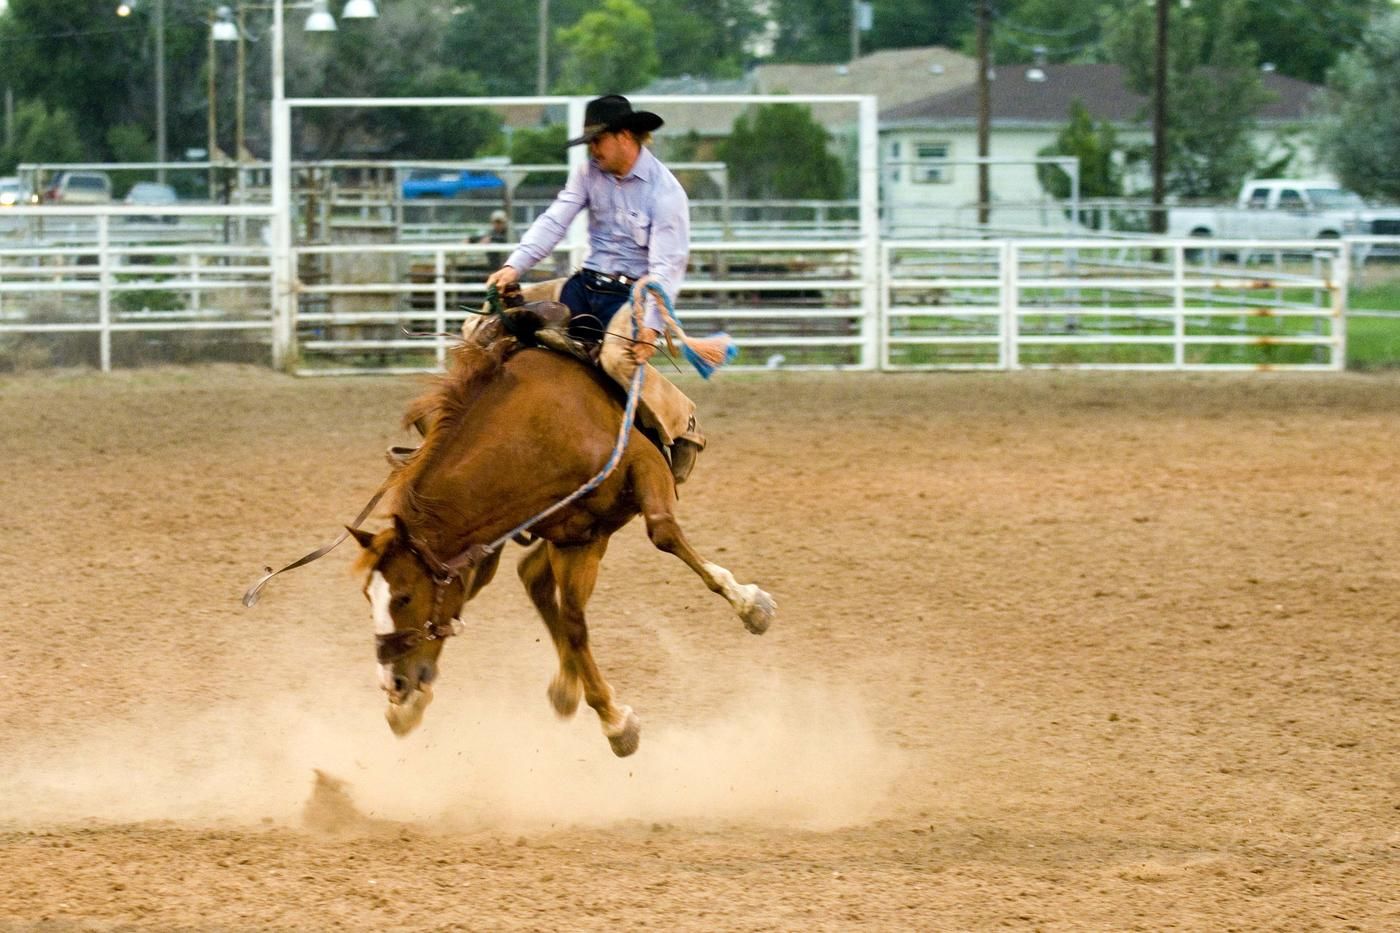 pro rodeo cowboy on horse jumping